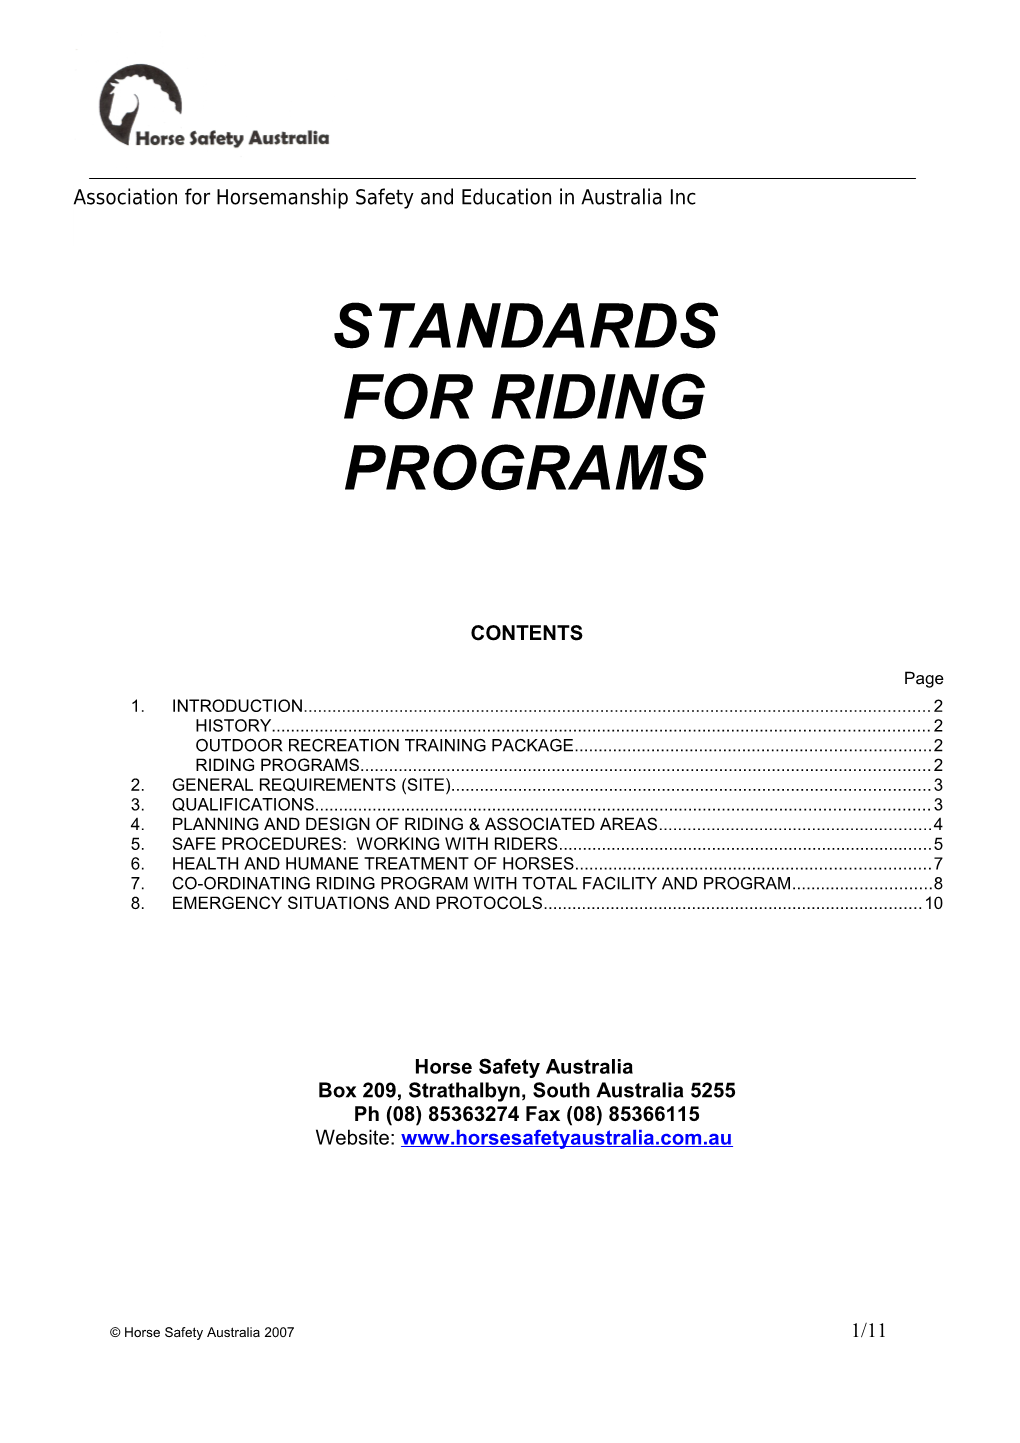 Standards - in Introduction